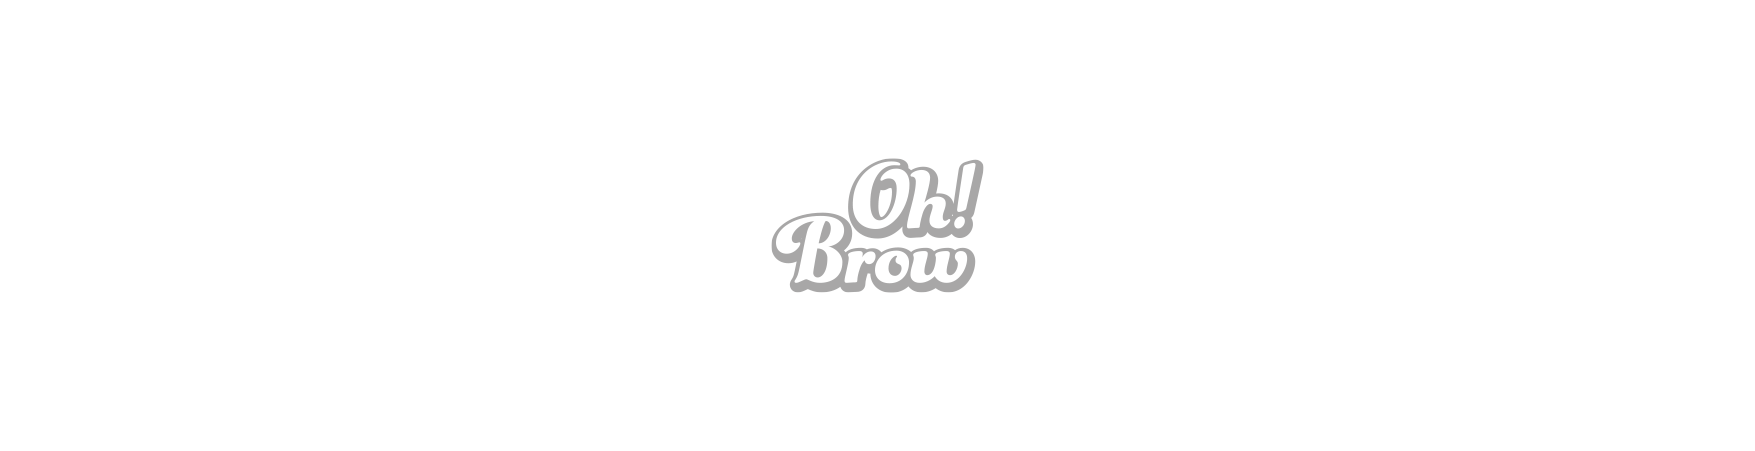 Oh! Brow